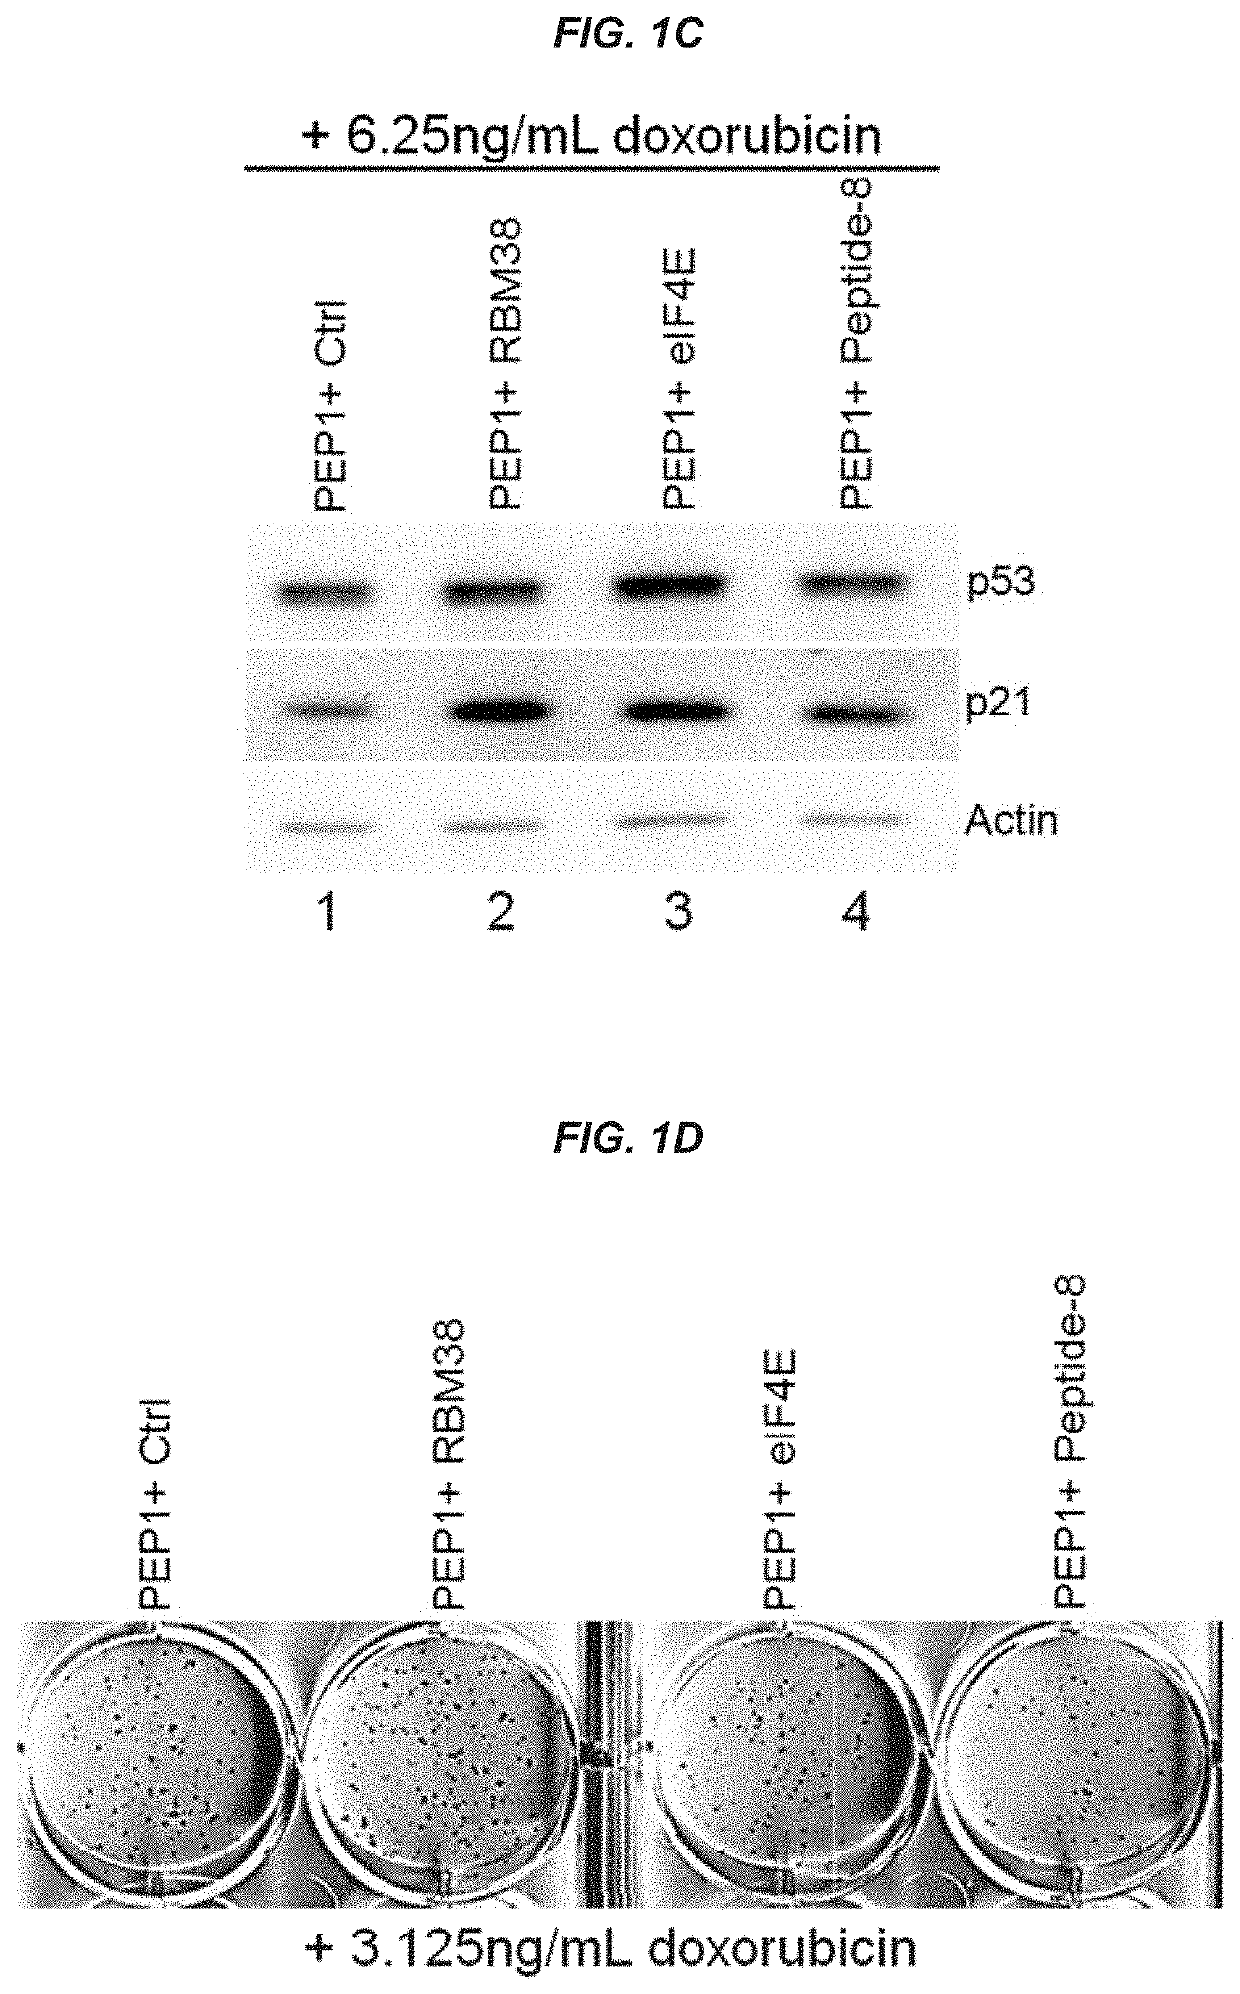 Modulation of P53 for the treatment of cancer